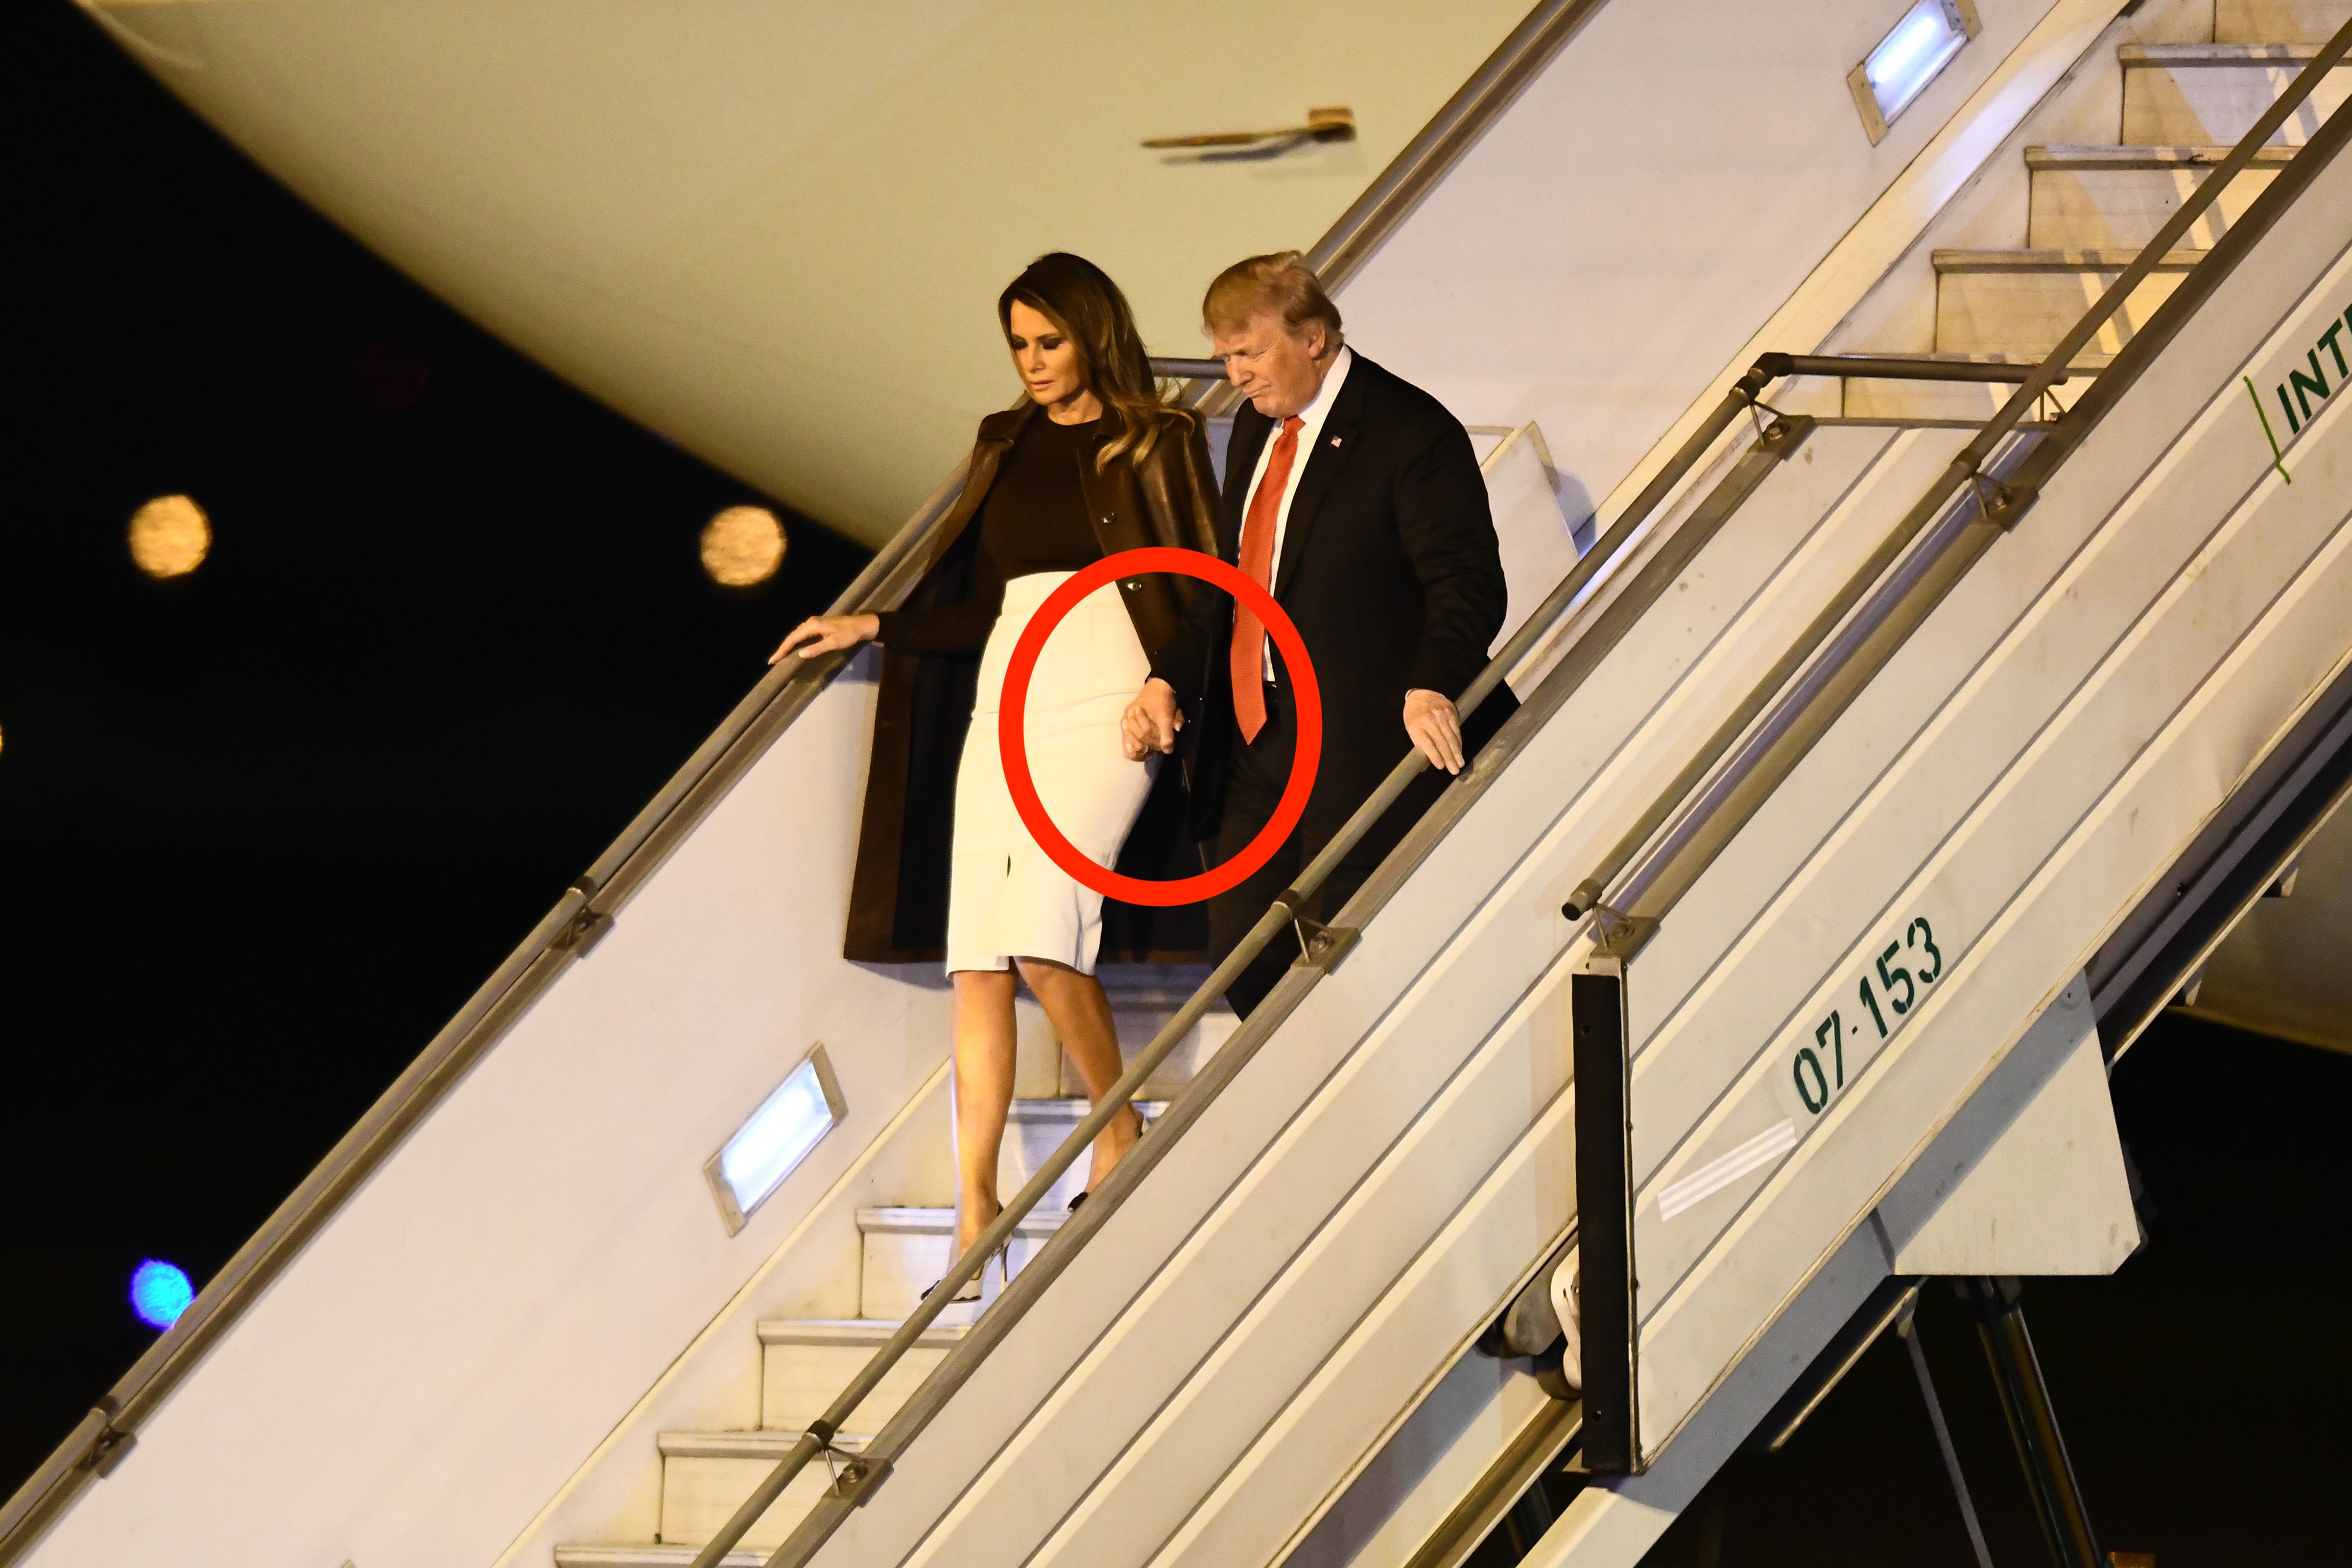 BUENOS AIRES, ARGENTINA - NOVEMBER 29: U.S. President Donald Trump and his wife Melania Trump descend from the Air Force One on their arrival to Buenos Aires for G20 Leaders' Summit 2018 at Ministro Pistarini International Airport on November 29, 2018 in Ezeiza, Buenos Aires, Argentina. Leaders of the G20 group of nations are meeting for the November 30th - December 1st summit. Amilcar Orfali/Getty Images